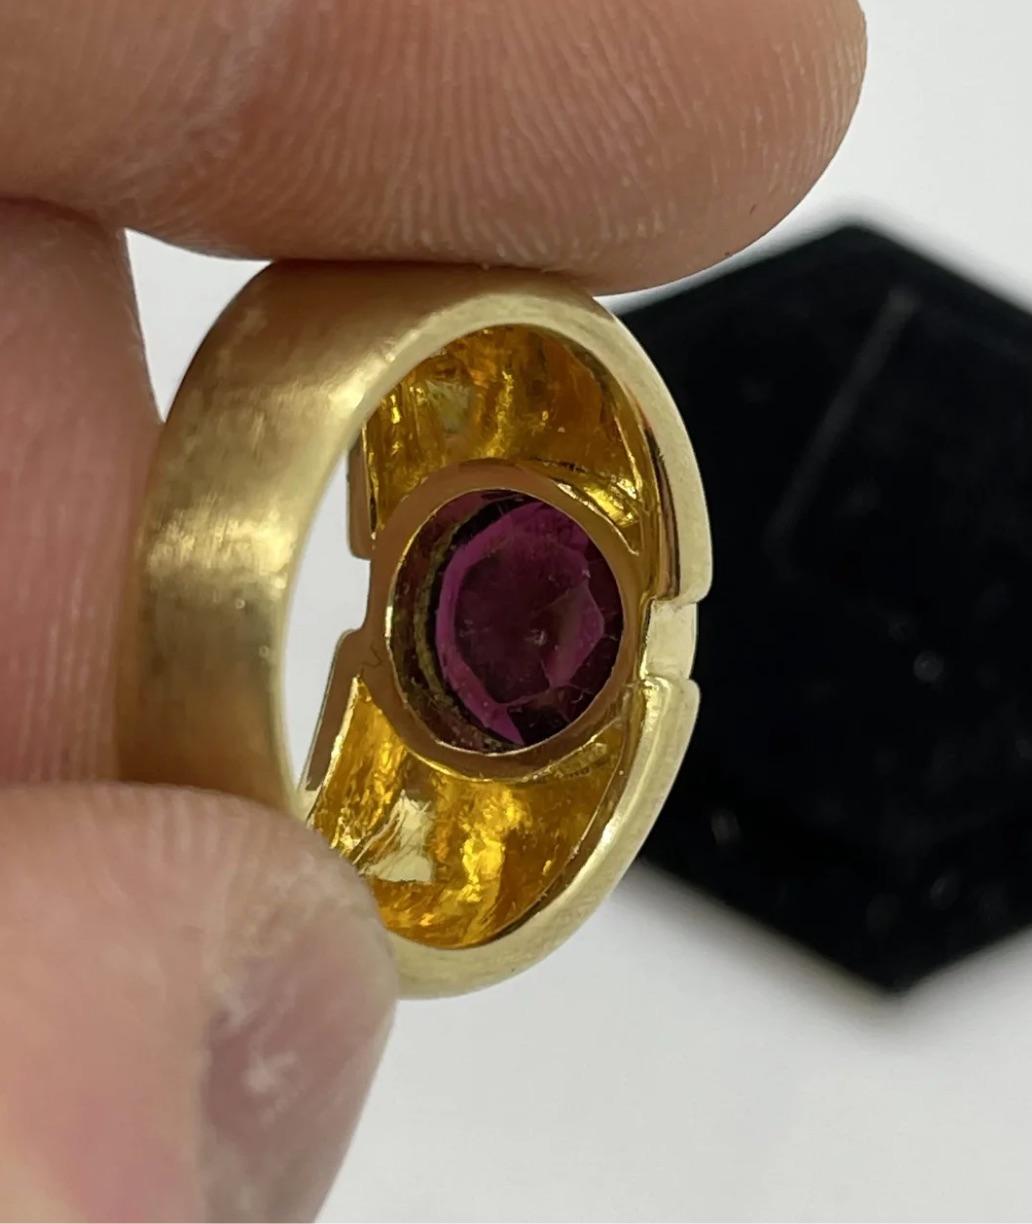 18k Gold Garnet Ring

Consistent with age and use please see the photos for condition
Please ask for more photos if you need we will send them with in 24-48 hours

Due to the item's age do not expect items to be in perfect condition and I may not